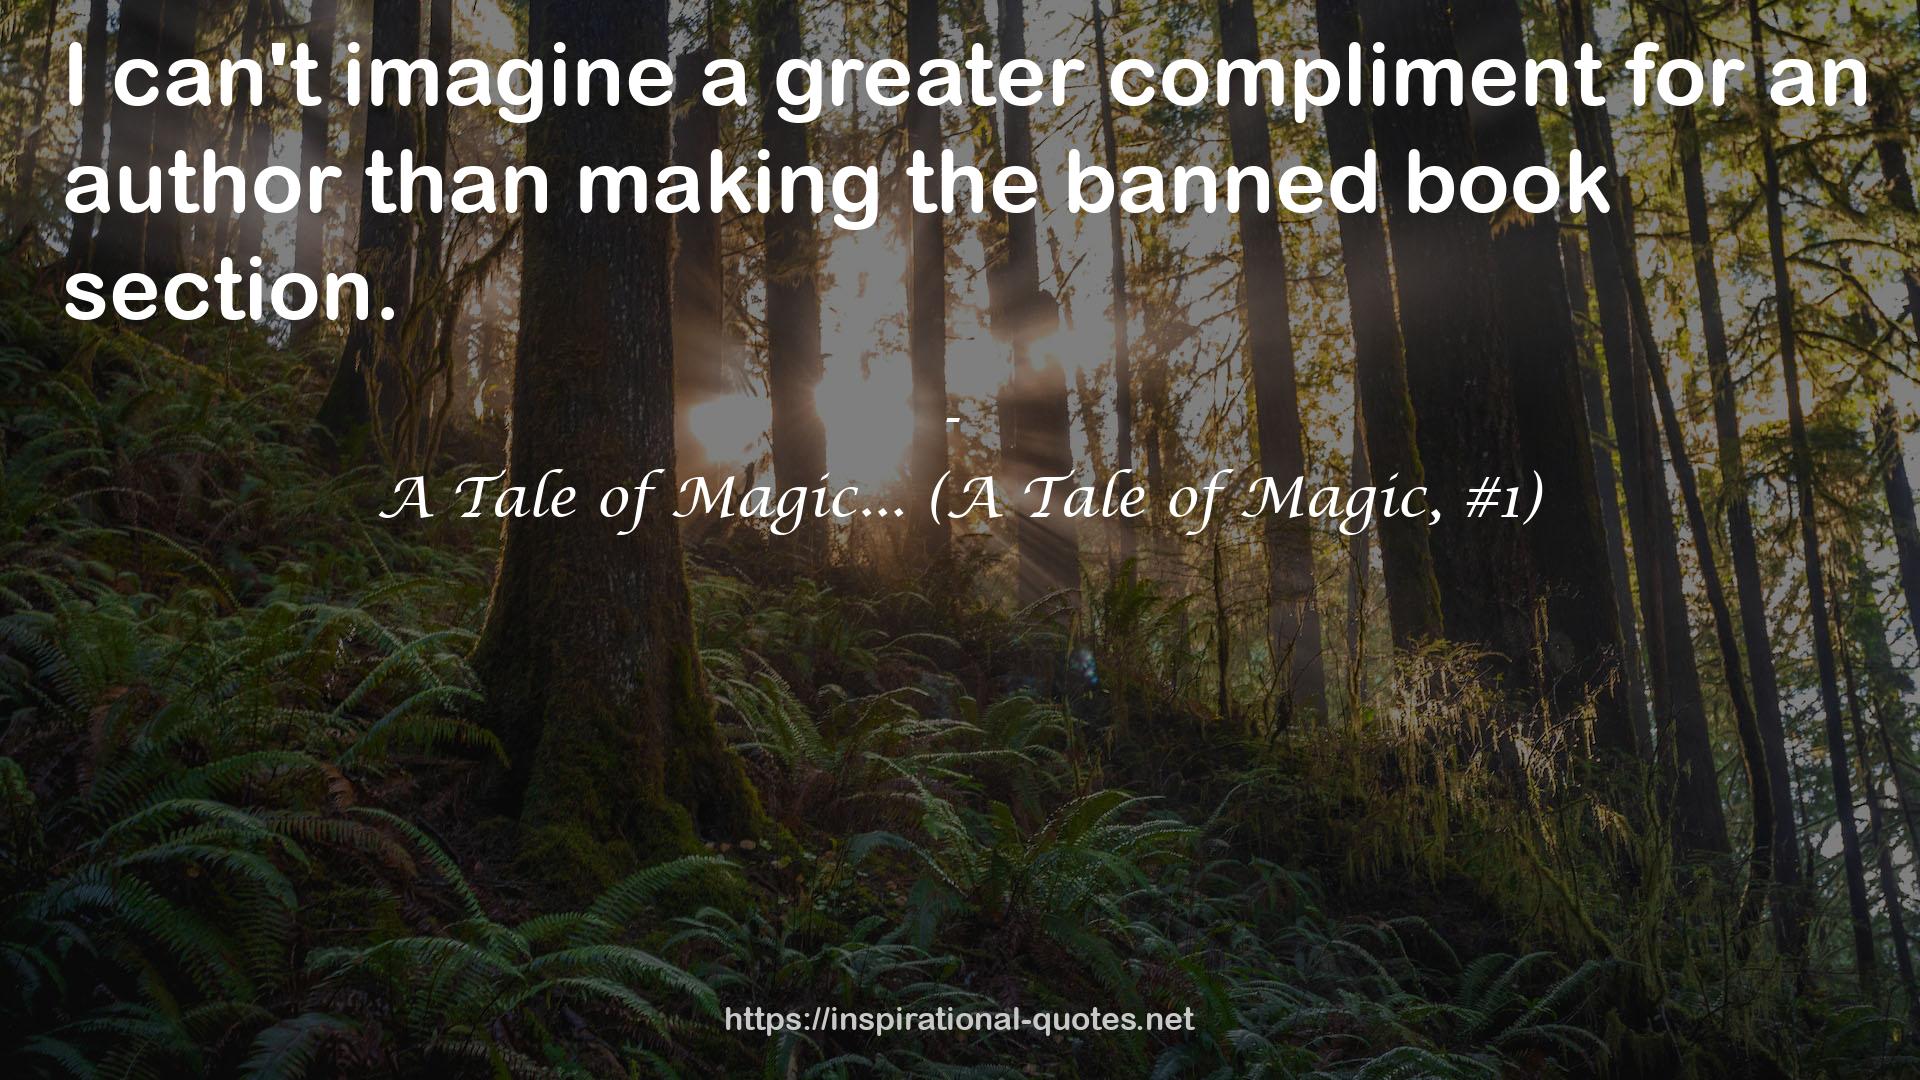 A Tale of Magic... (A Tale of Magic, #1) QUOTES